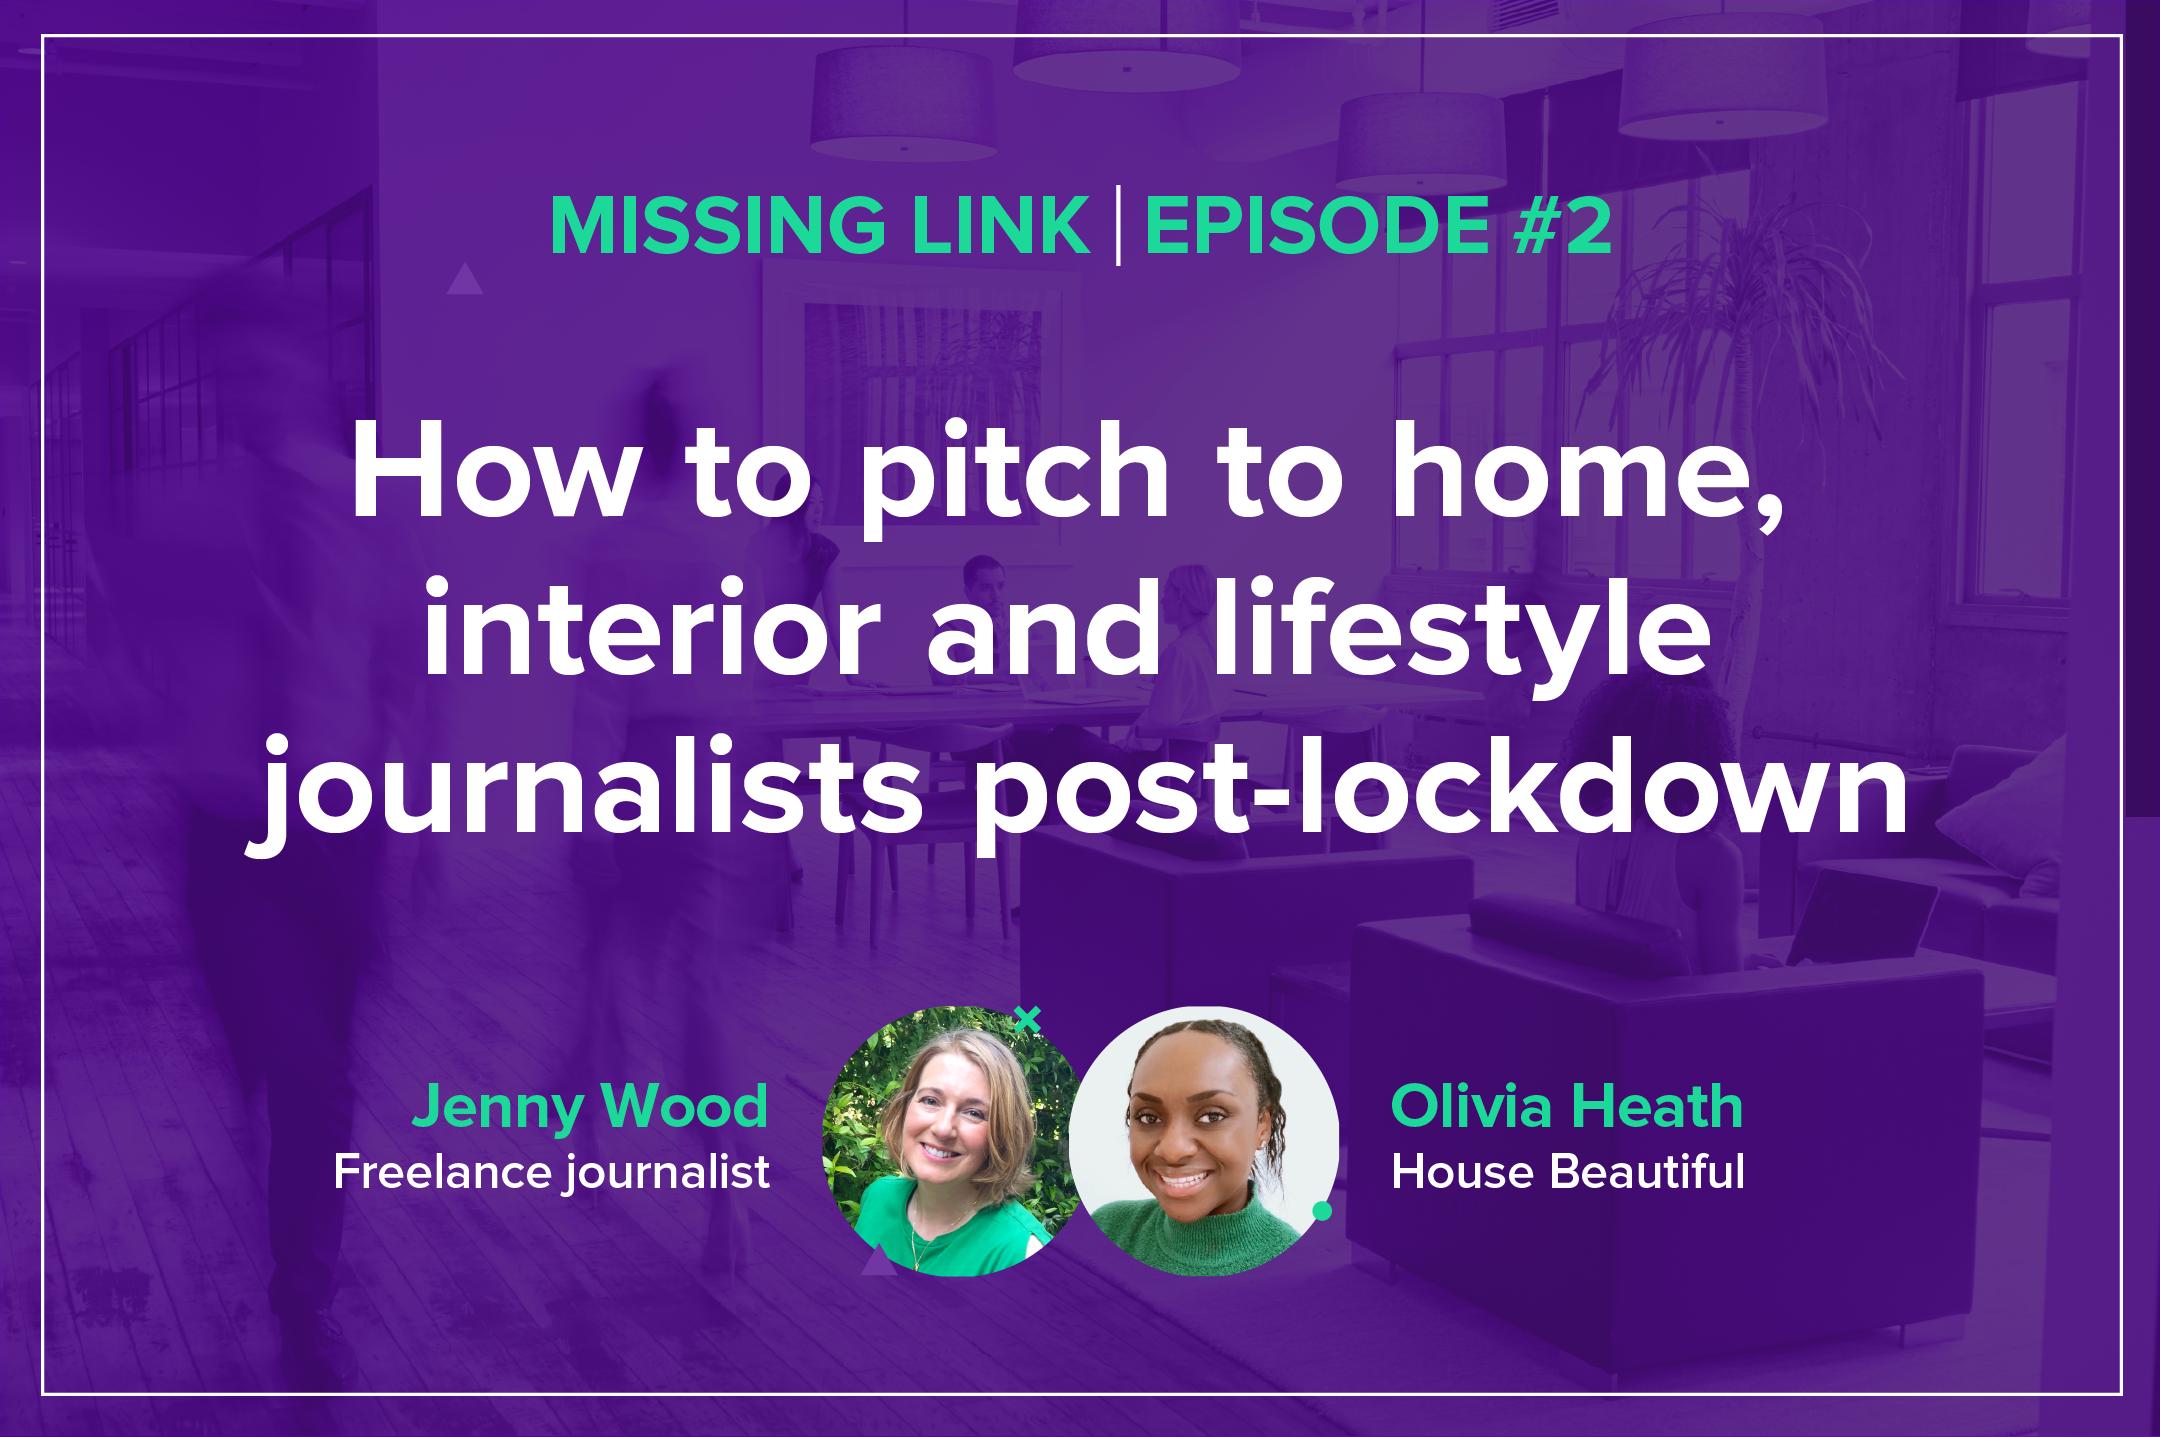 how to pitch to home, interior and lifestyle journalists post-lockdown